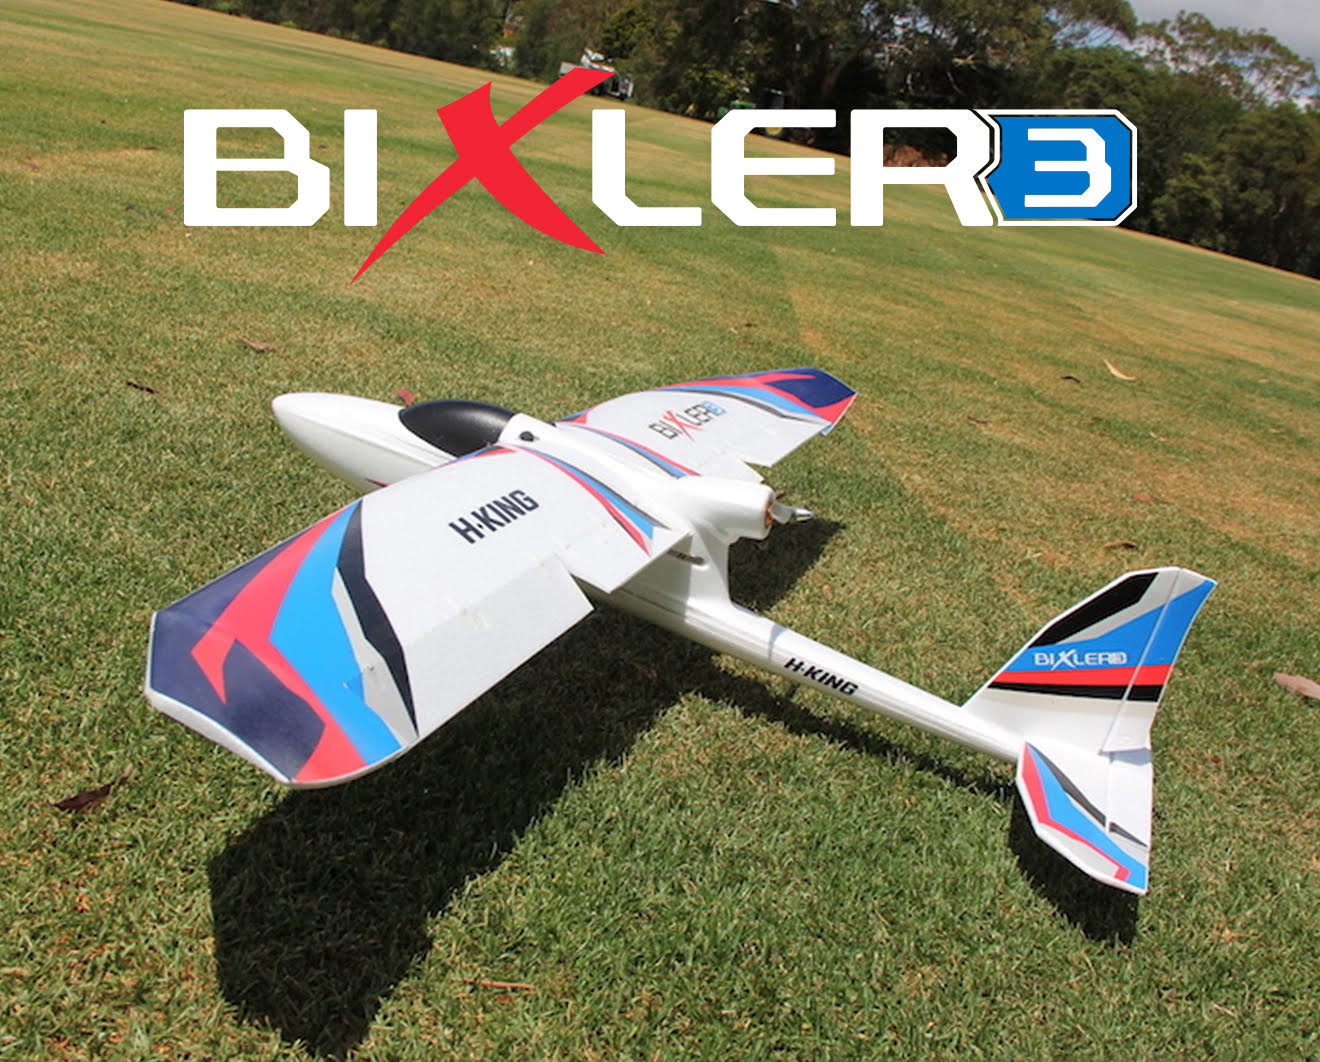 Bixler 3: Small Enough for Your Car and Easy to Transport!